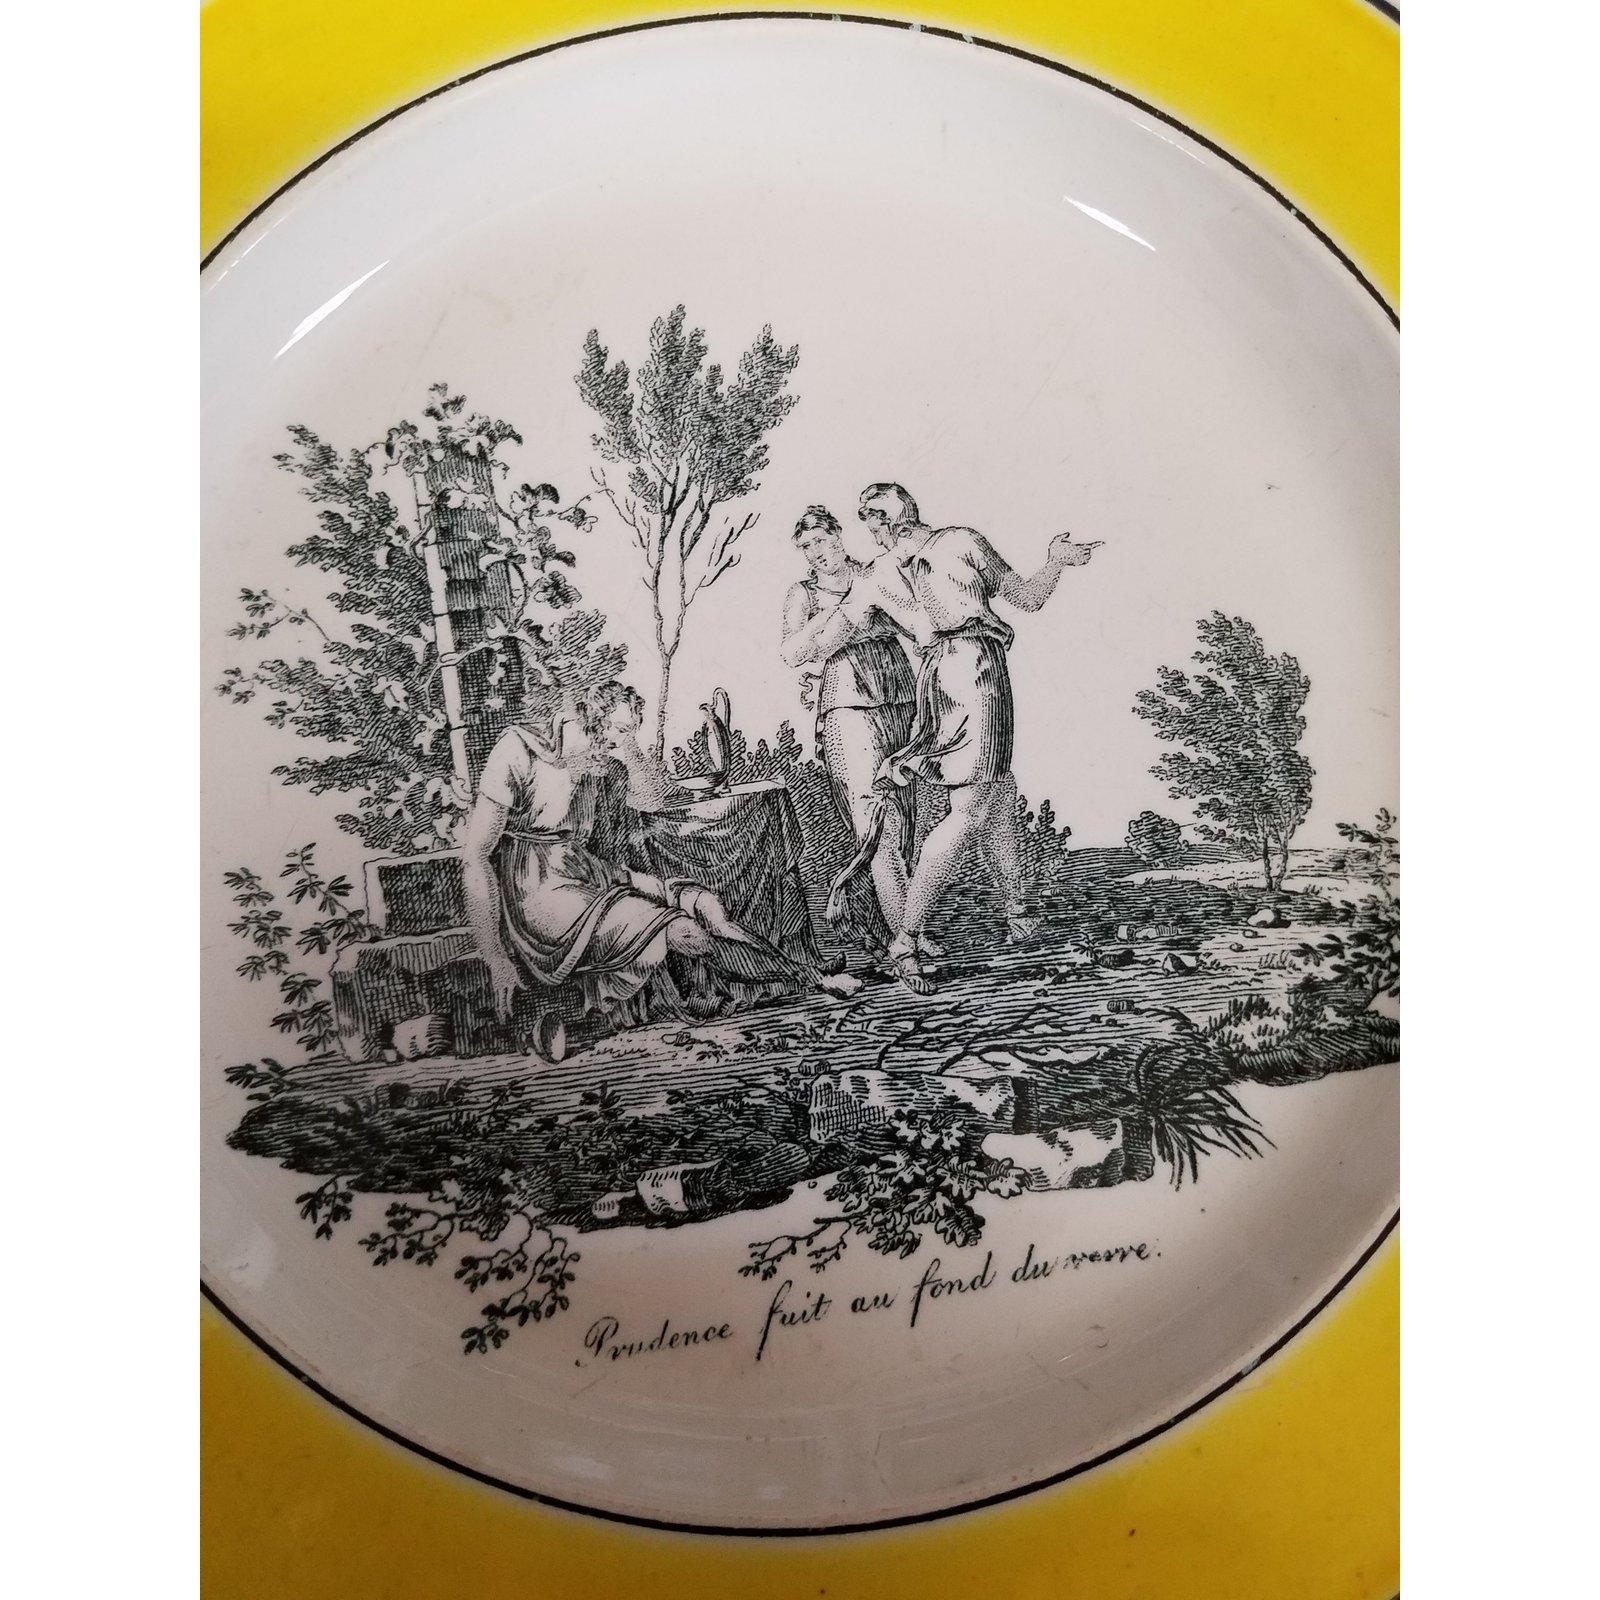 A set of three very early 19th century French classical scene plates in a black transfer toile transfer pattern with vibrant canary yellow borders. Each signed Creil in very good condition with minor age related wear. Measures: 7.5 inches in